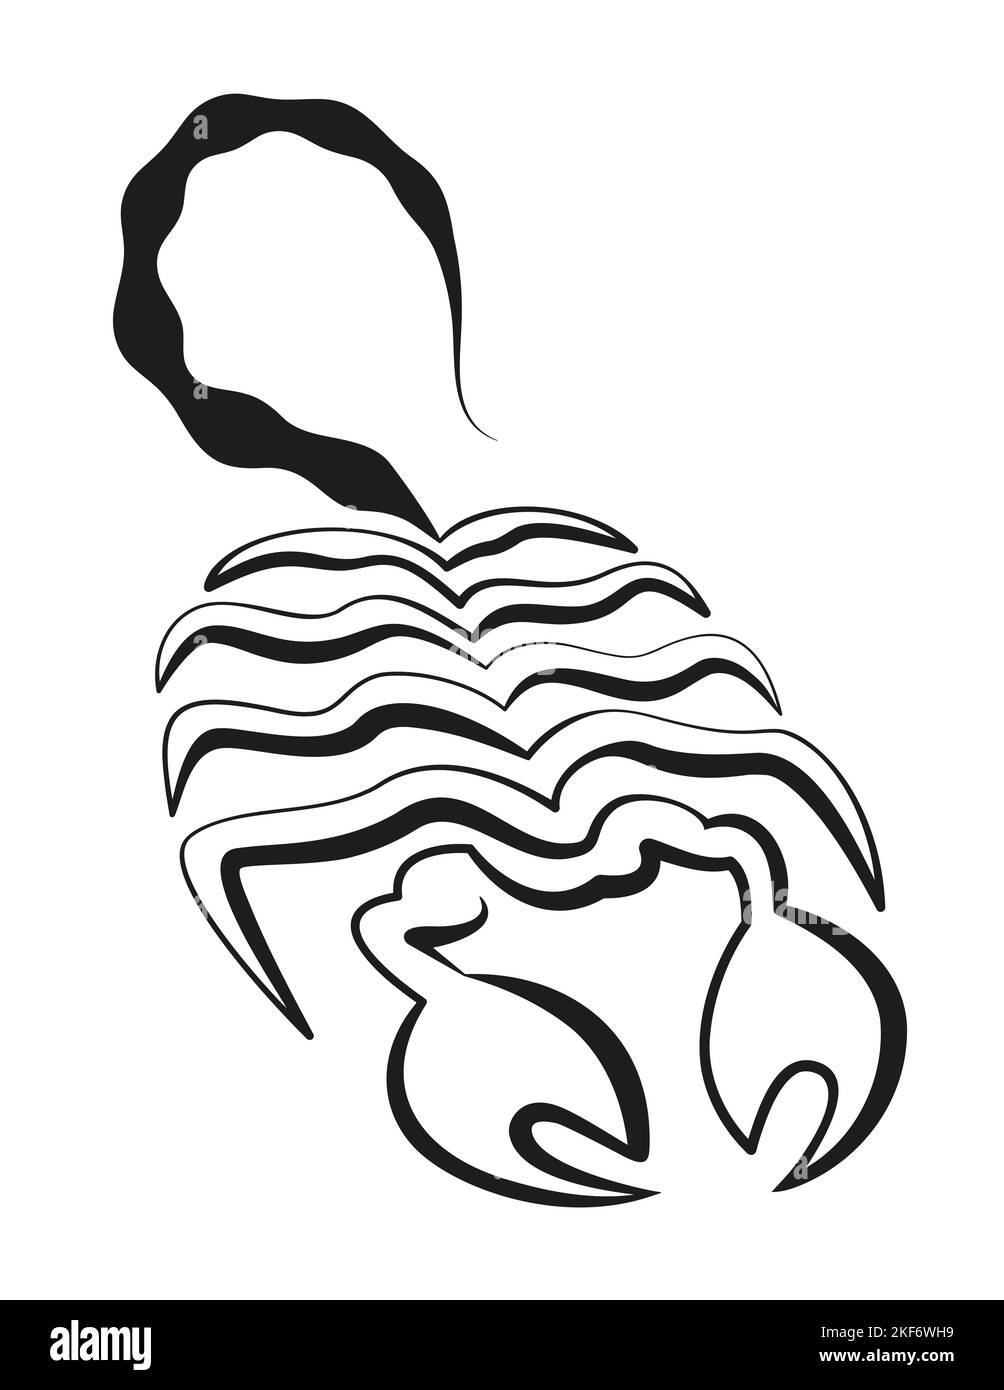 Scorpion symbol drawing - only one continuous solid black line - illustration on white background. Stock Photo